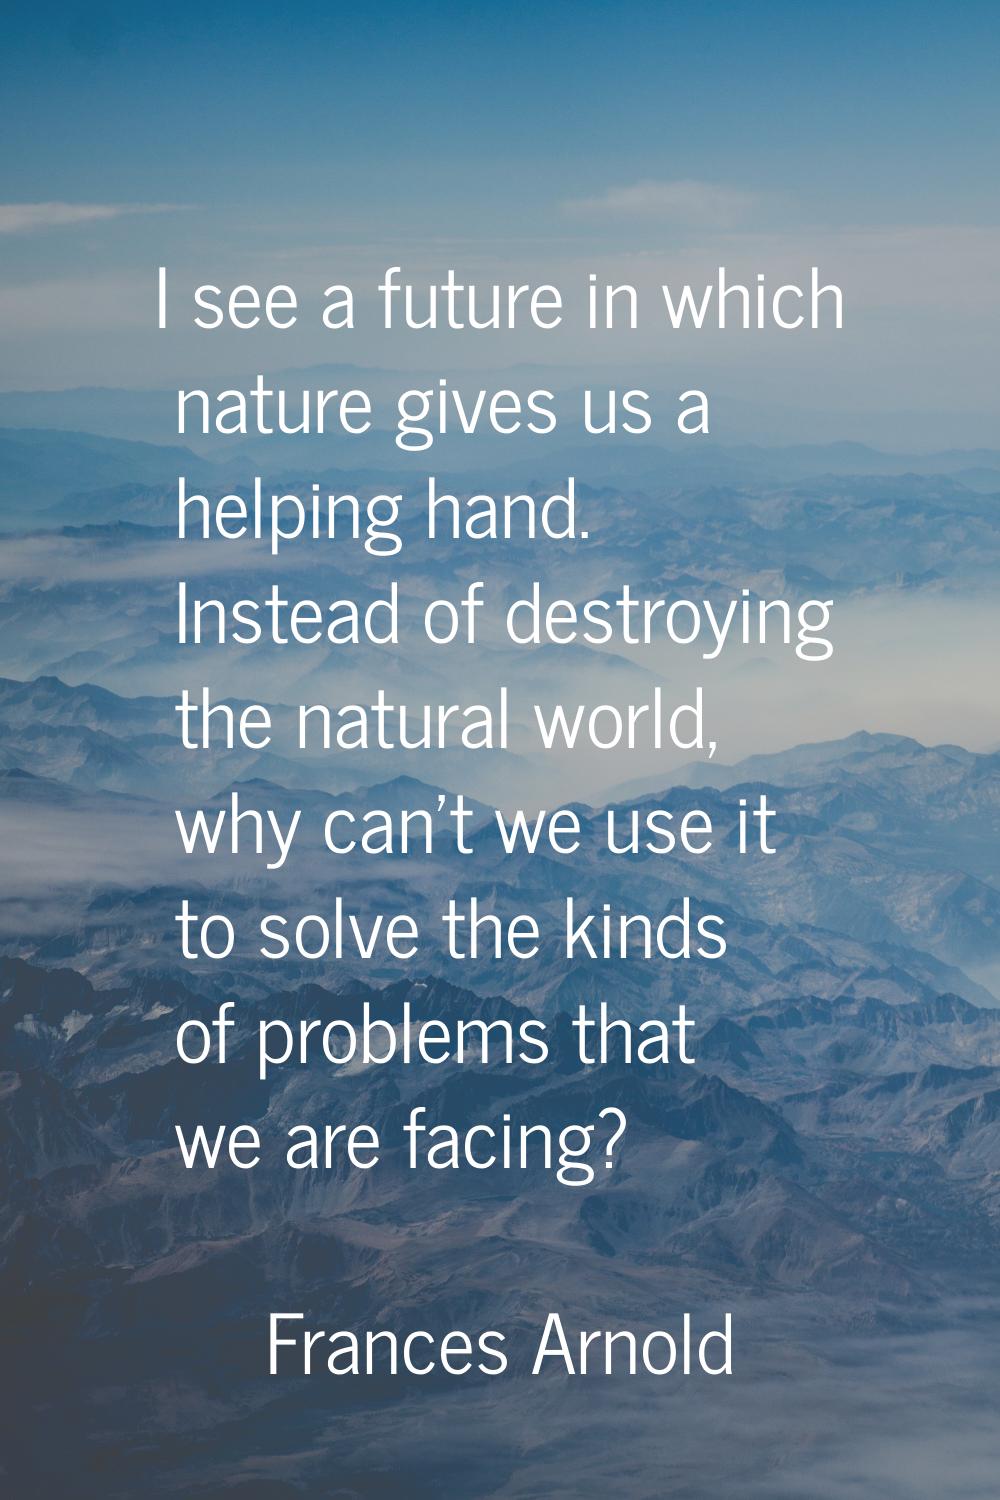 I see a future in which nature gives us a helping hand. Instead of destroying the natural world, wh